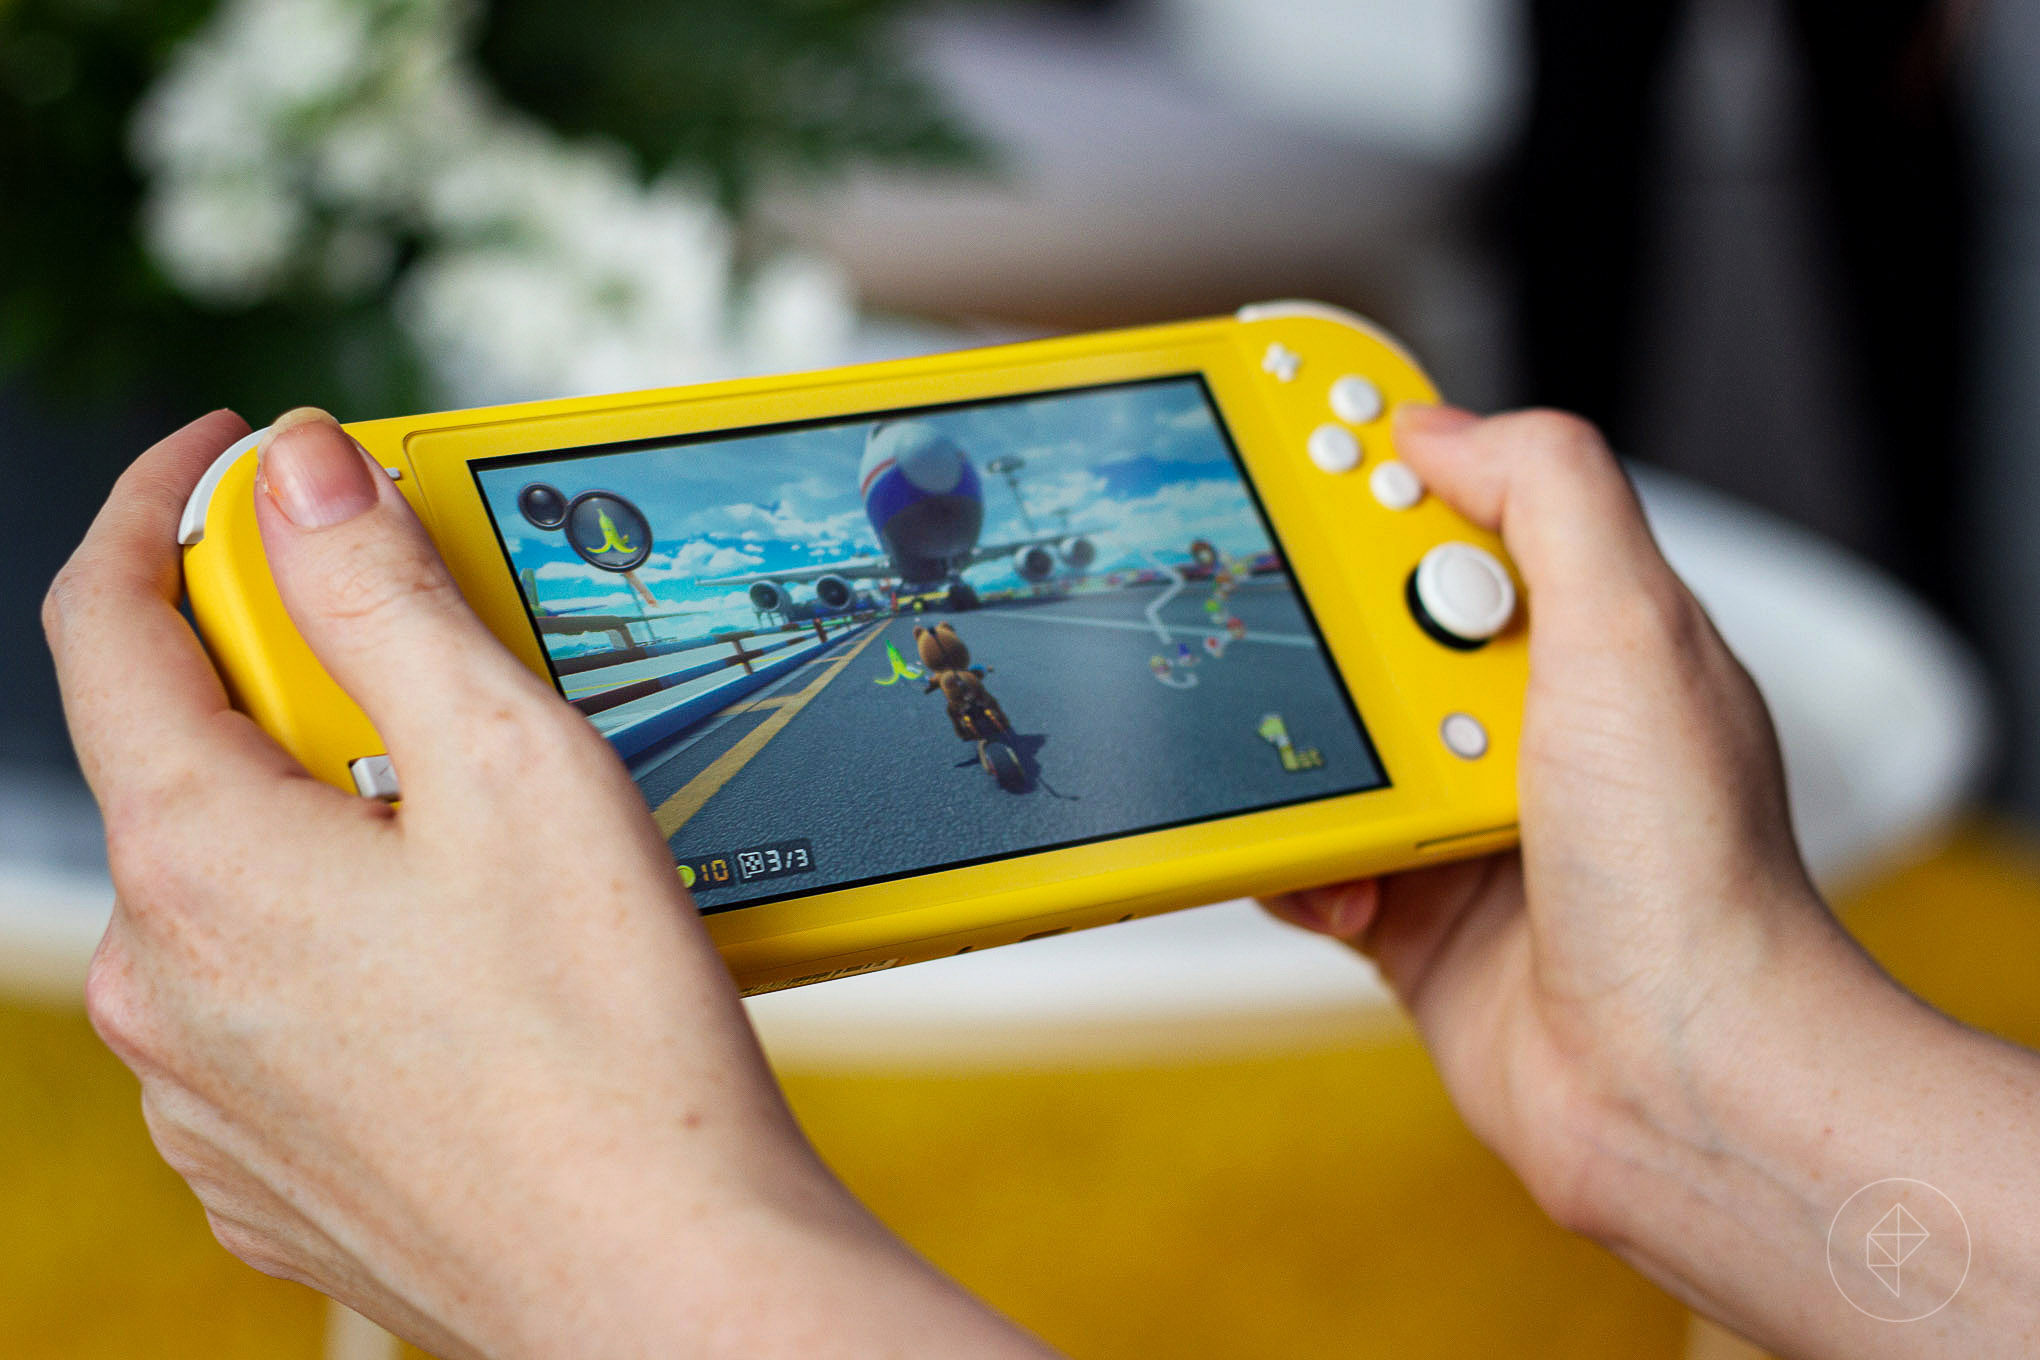 Photograph of a yellow Nintendo Switch Lite playing Mario Kart 8 Deluxe